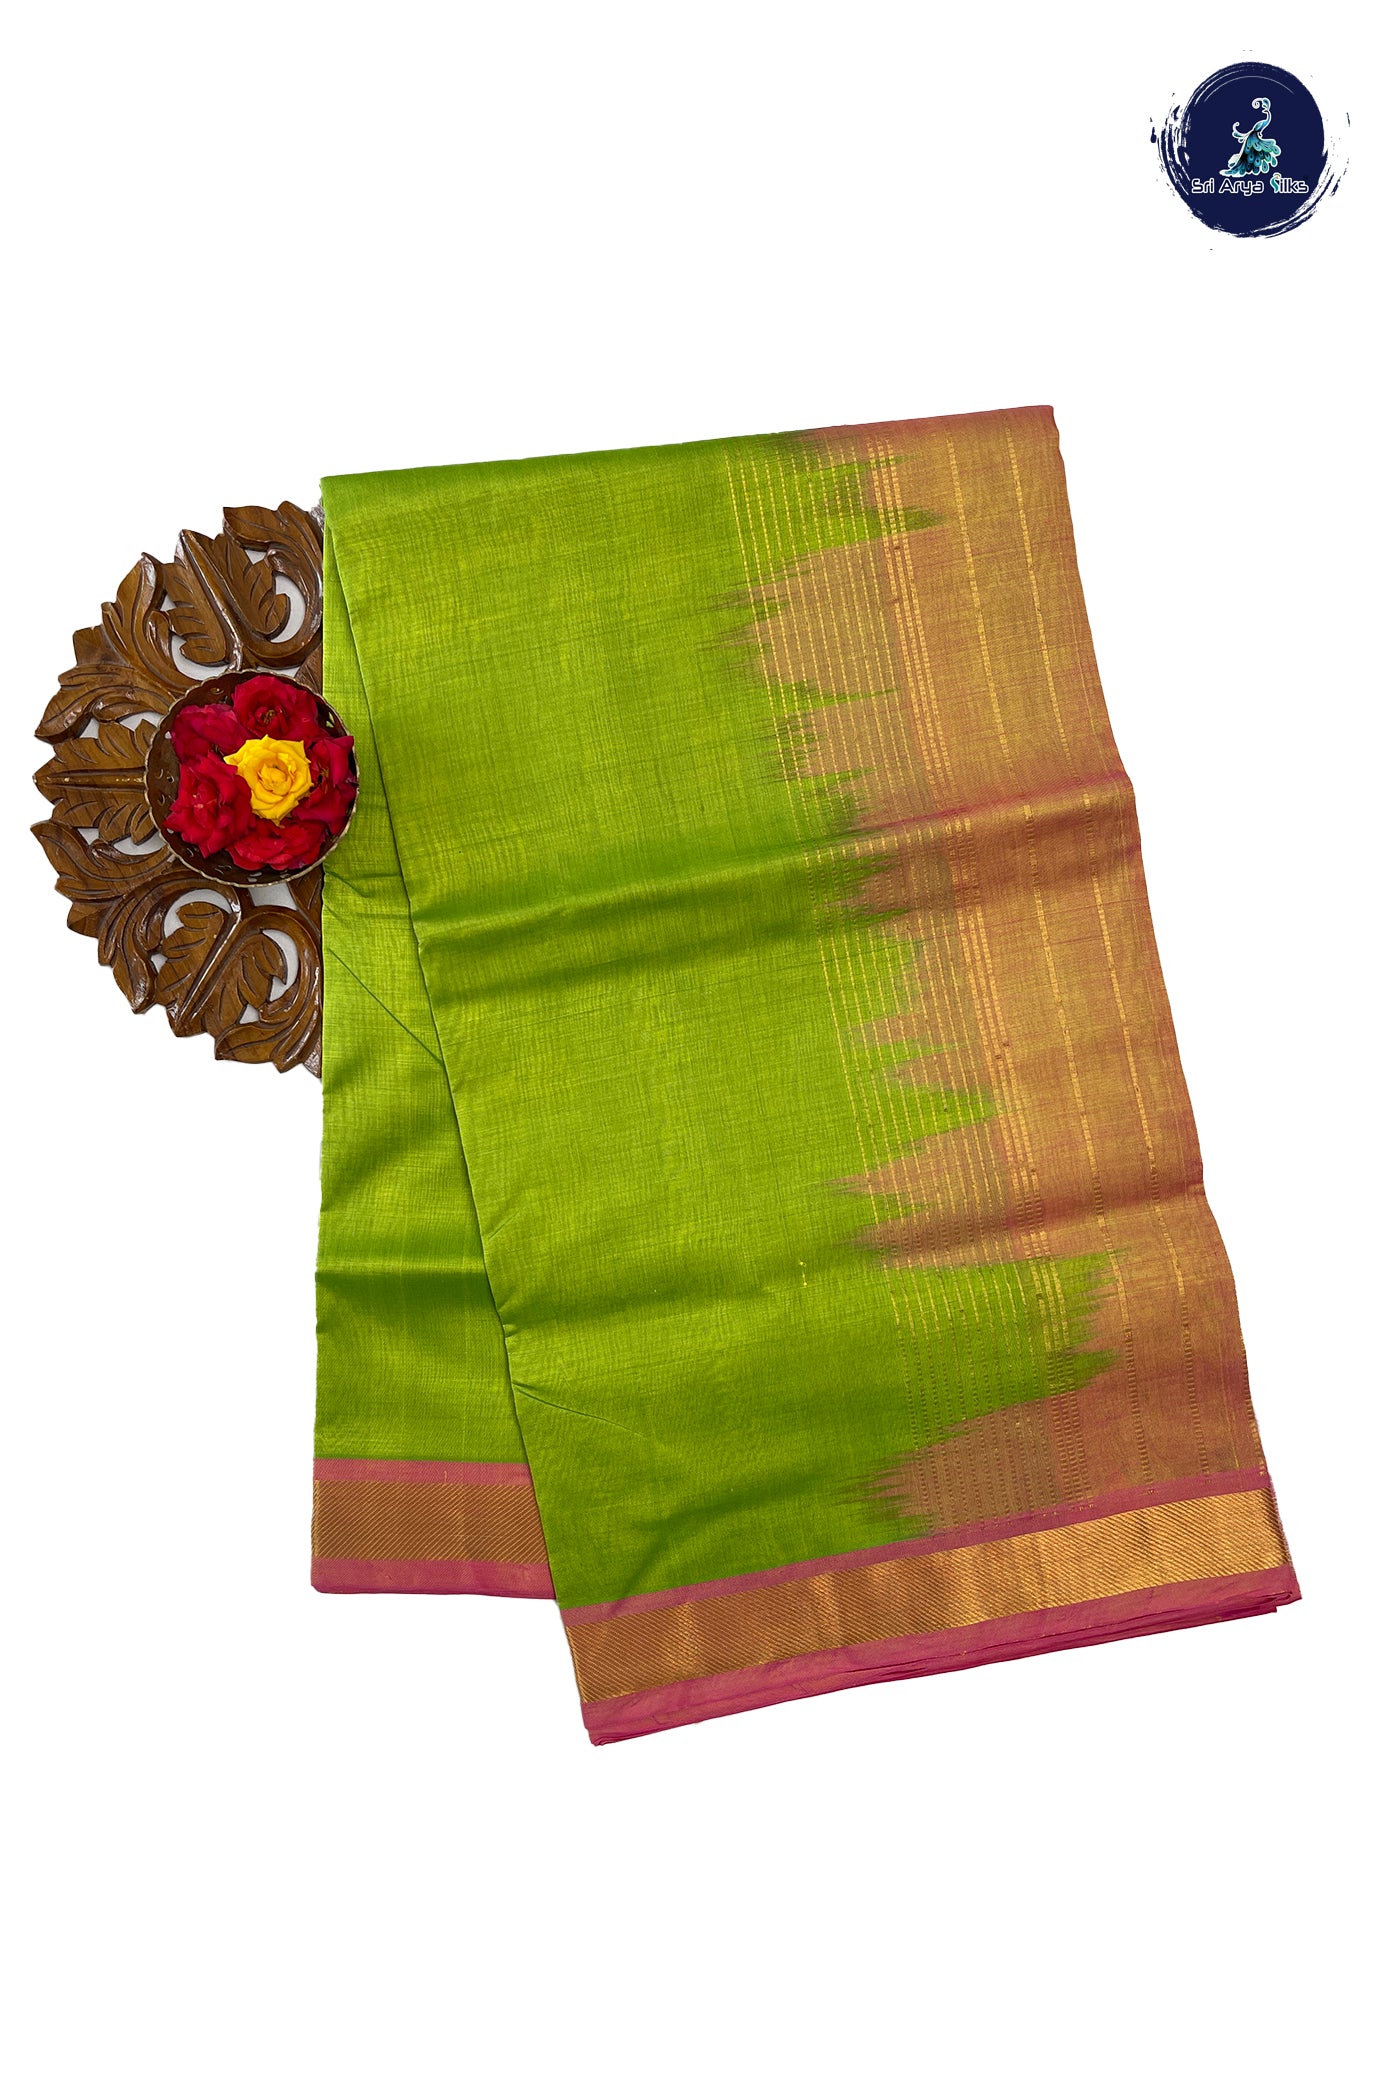 Which shop is best for silk sarees and half sarees for puberty function?  RMKV silks or Pothys or Madharsha or Kumaran silks or Chennai silks or Nalli?  It should be in budget